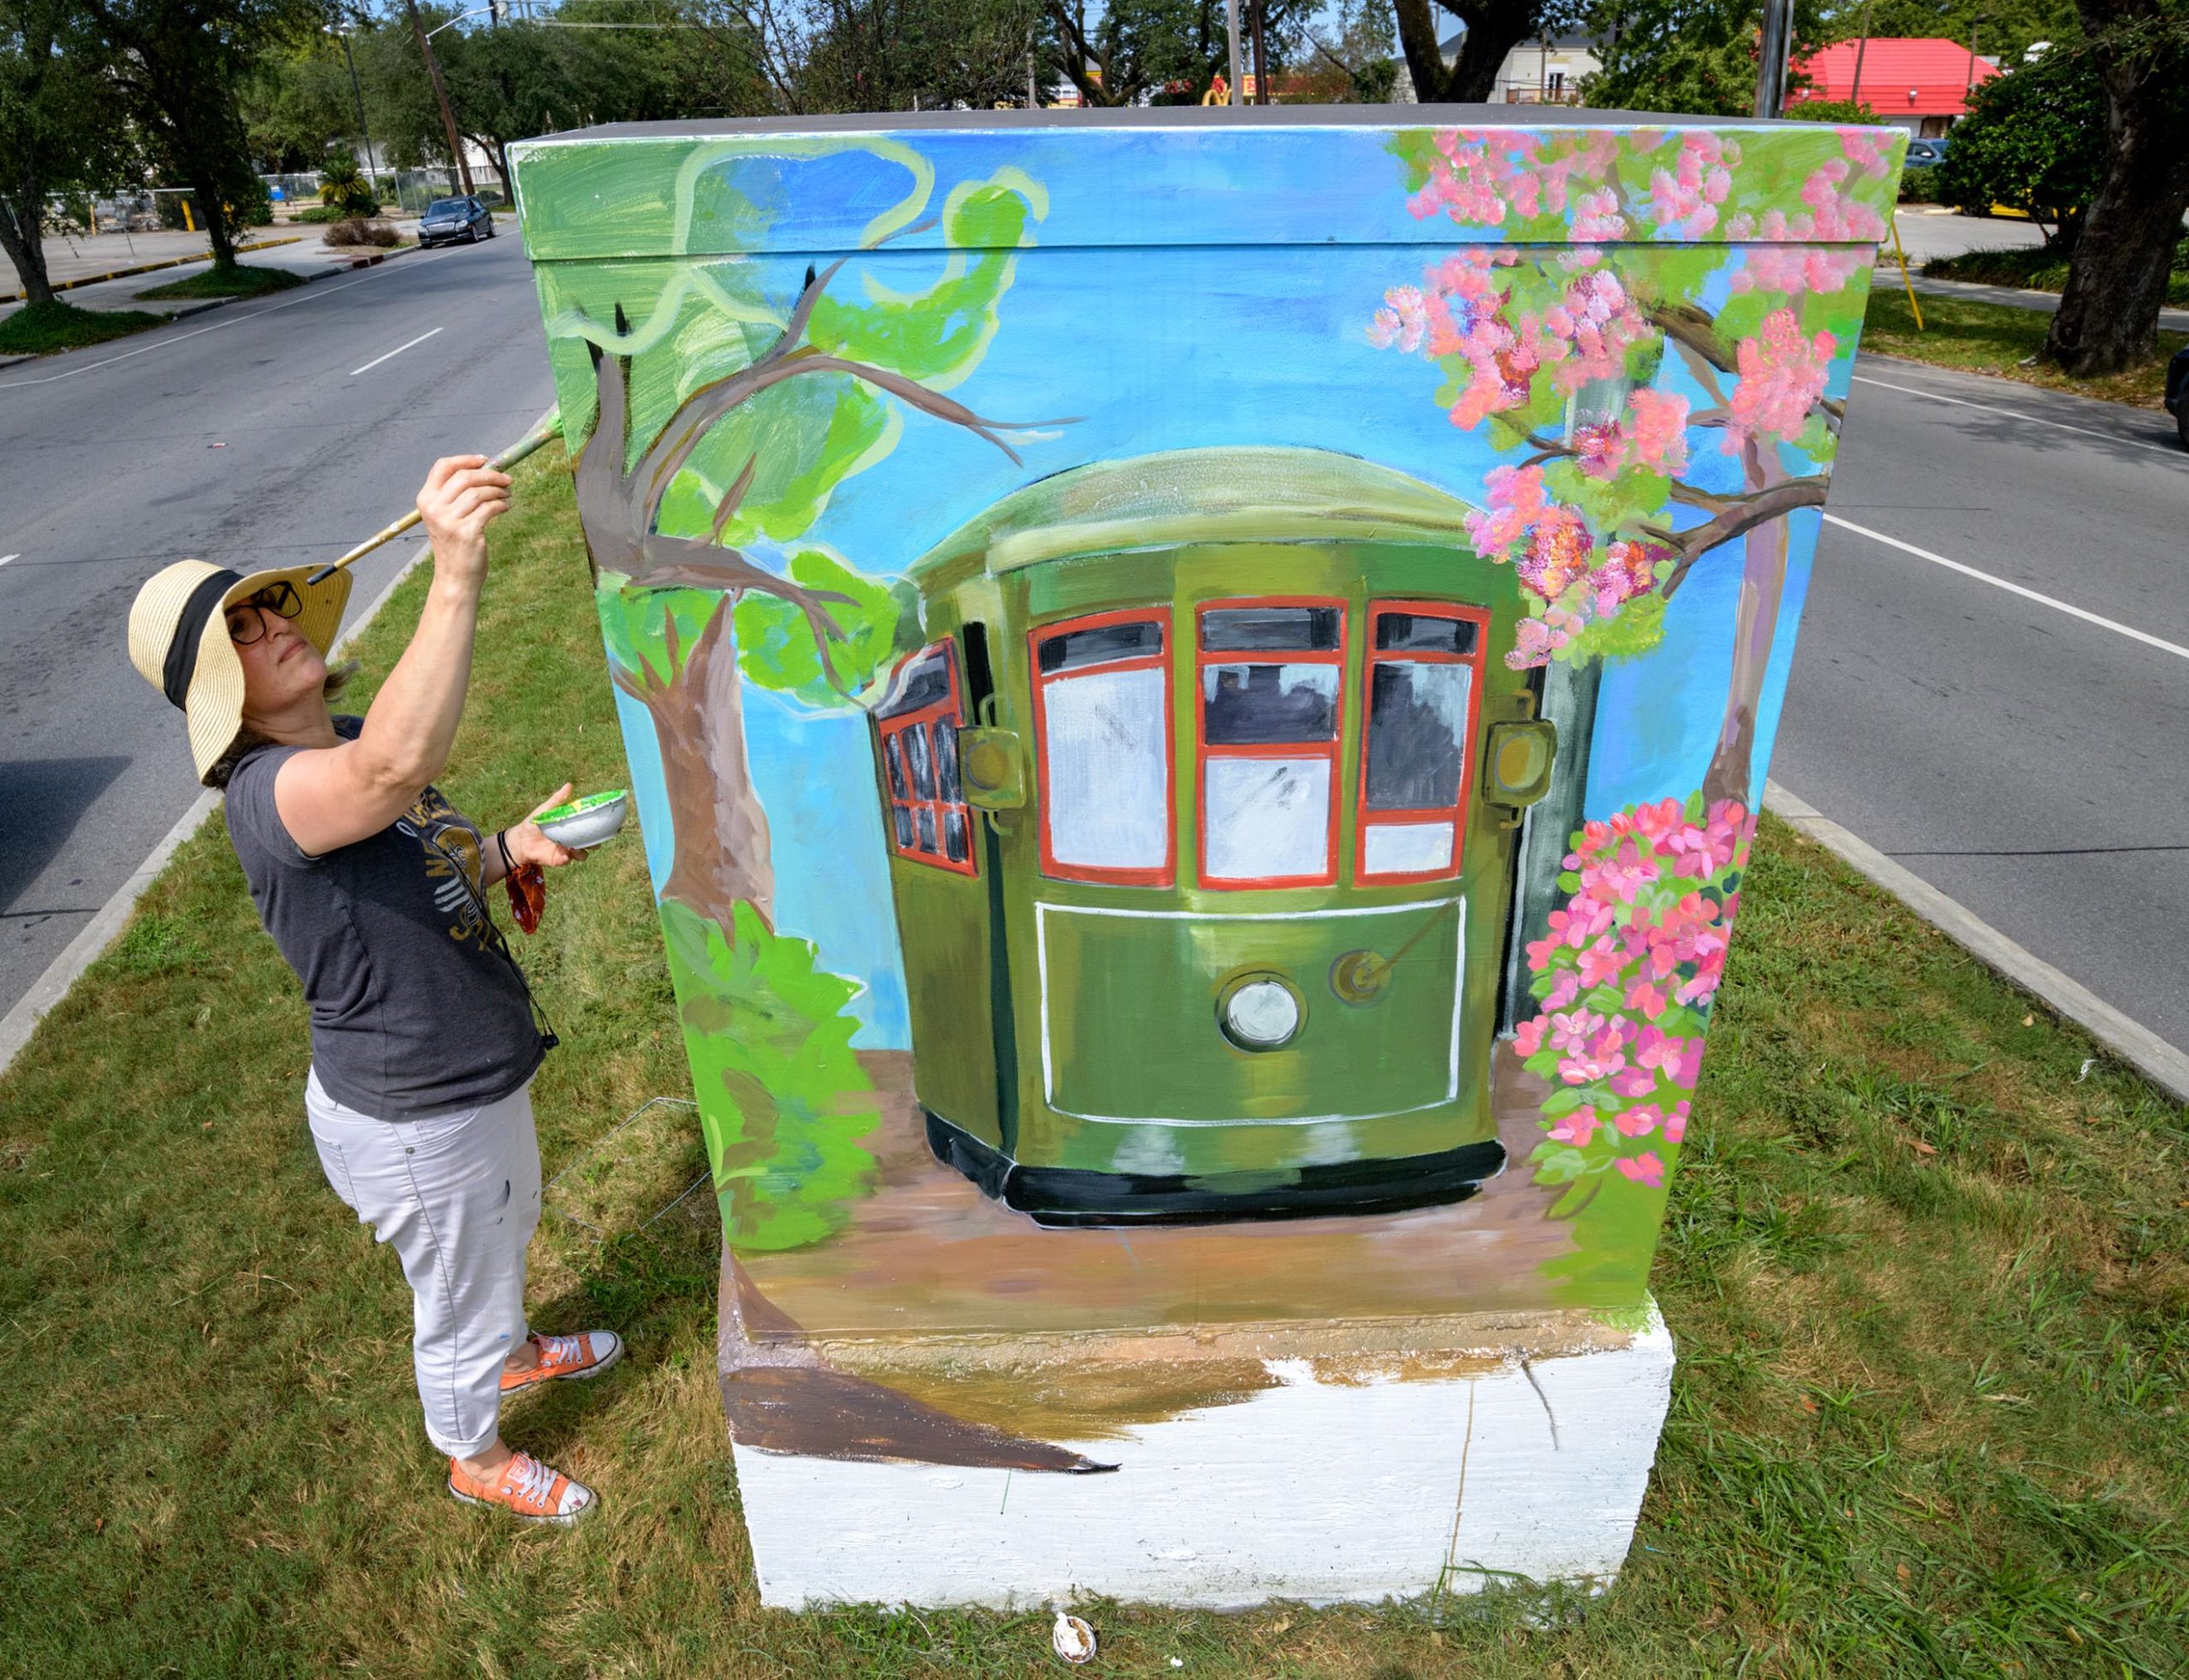 #TheOrnateOutdoors : Rebecca Birtel Madura, a native of New Orleans, paints a signal box at the intersection of Louisiana Ave and St. Charles Ave in Uptown New Orleans for Community Visions Unlimited, @cvunola, Friday, Sept. 25, 2020. Since 1994, the nonprofit CVUNOLA has been dedicated to revitalizing New Orleans neighborhoods through beautification, housing, and empowerment. Birtel Madura, is a retired art teacher at local parochial, private and public schools in New Orleans where she was also involved in art curriculum development. This is the third box she has painted for the CVU project which includes many other artists throughout the city. You can see the finished project @rabmadura. Photo by @MattHintonPhoto for @VeryLocalNOLA

#paintedsignalboxes #uptownNewOrleans #milan #touro #CentralCity #GardenDistrict #vlnola #Louisiana #NewOrleans #ornateorleans #exploreneworleans #ornateoutdoors #eastbank #rabmadura #cvunola